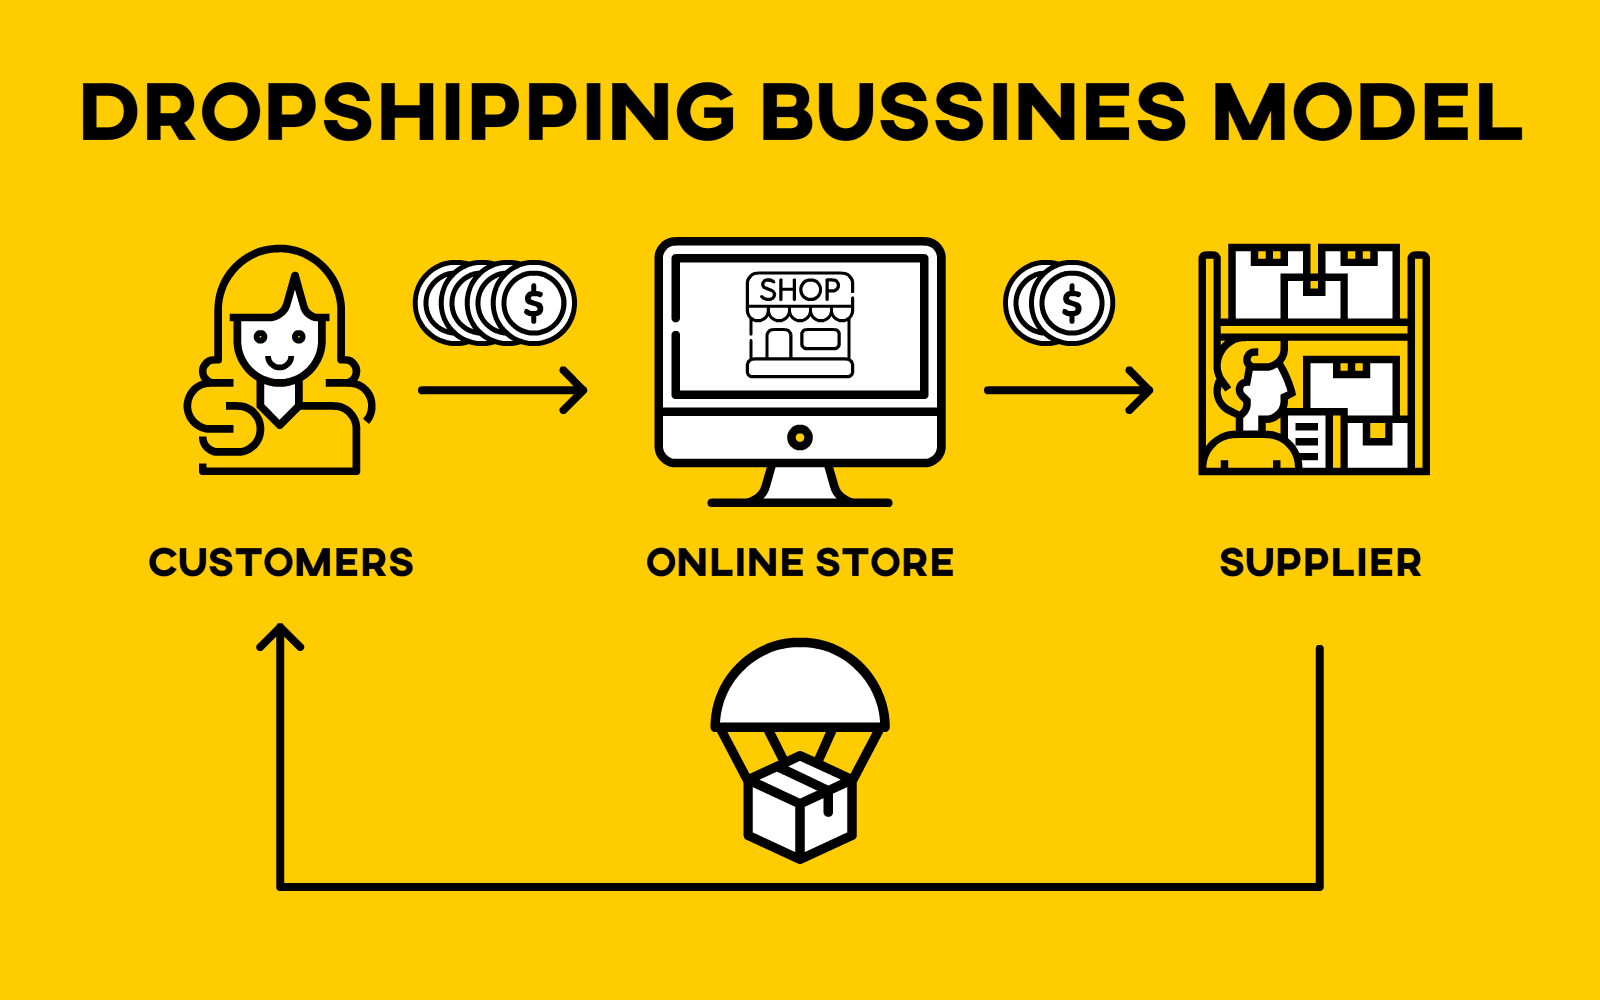 what is dropshipping?